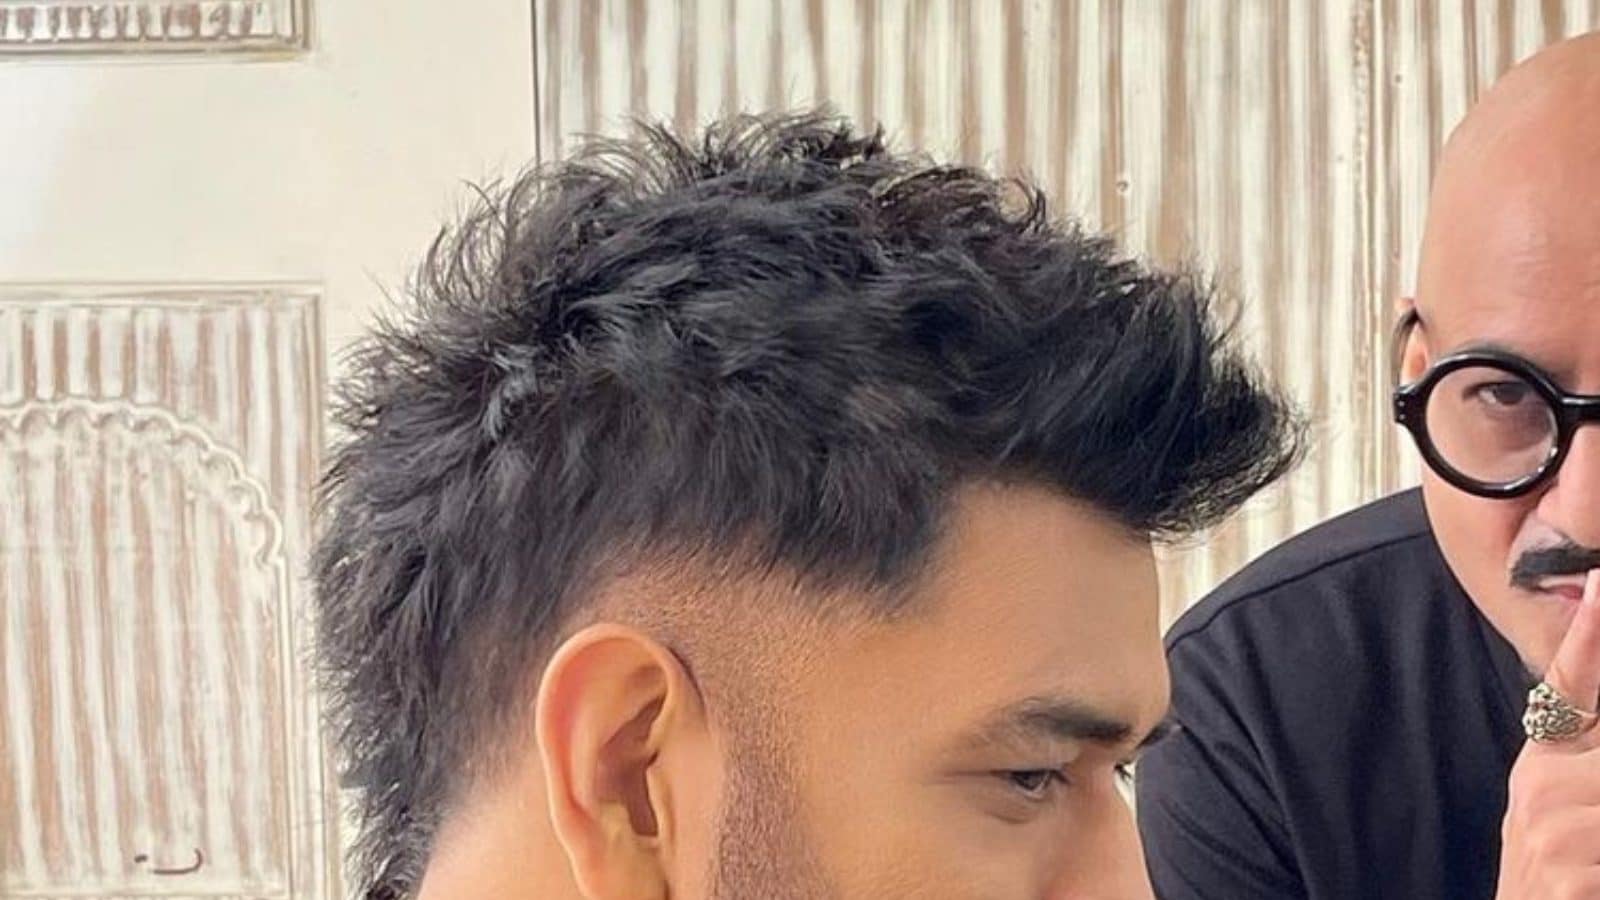 MS Dhoni went back in time with a new hairstyle - MS Dhoni went back in  time with a new hairstyle -